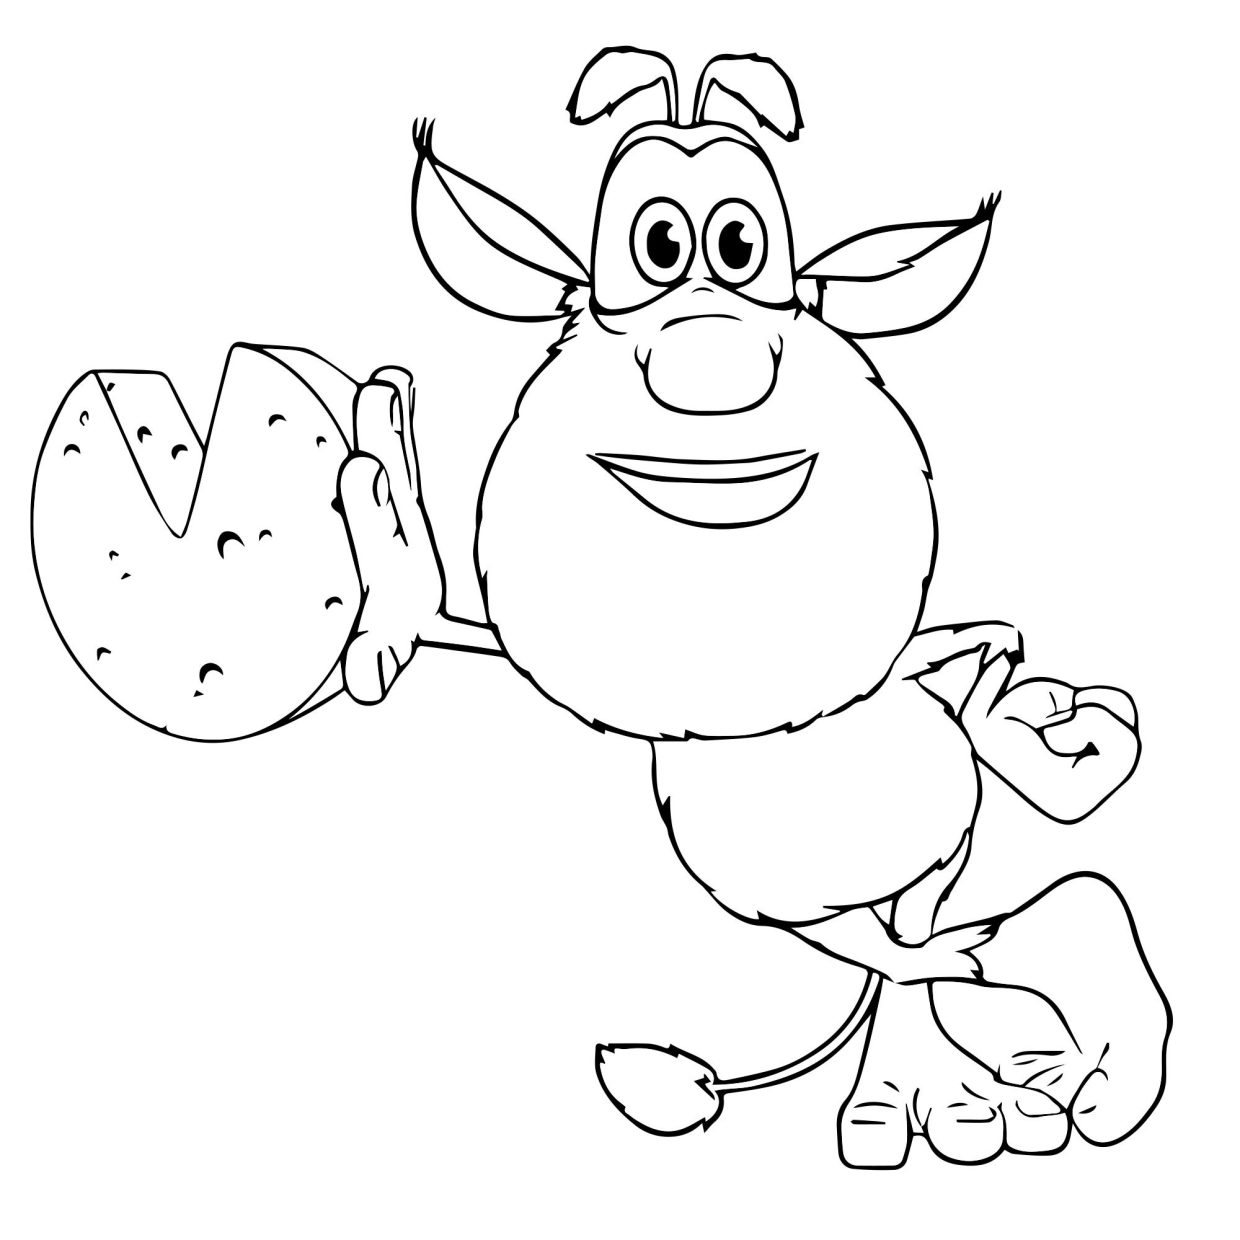 Booba Coloring Pages 1